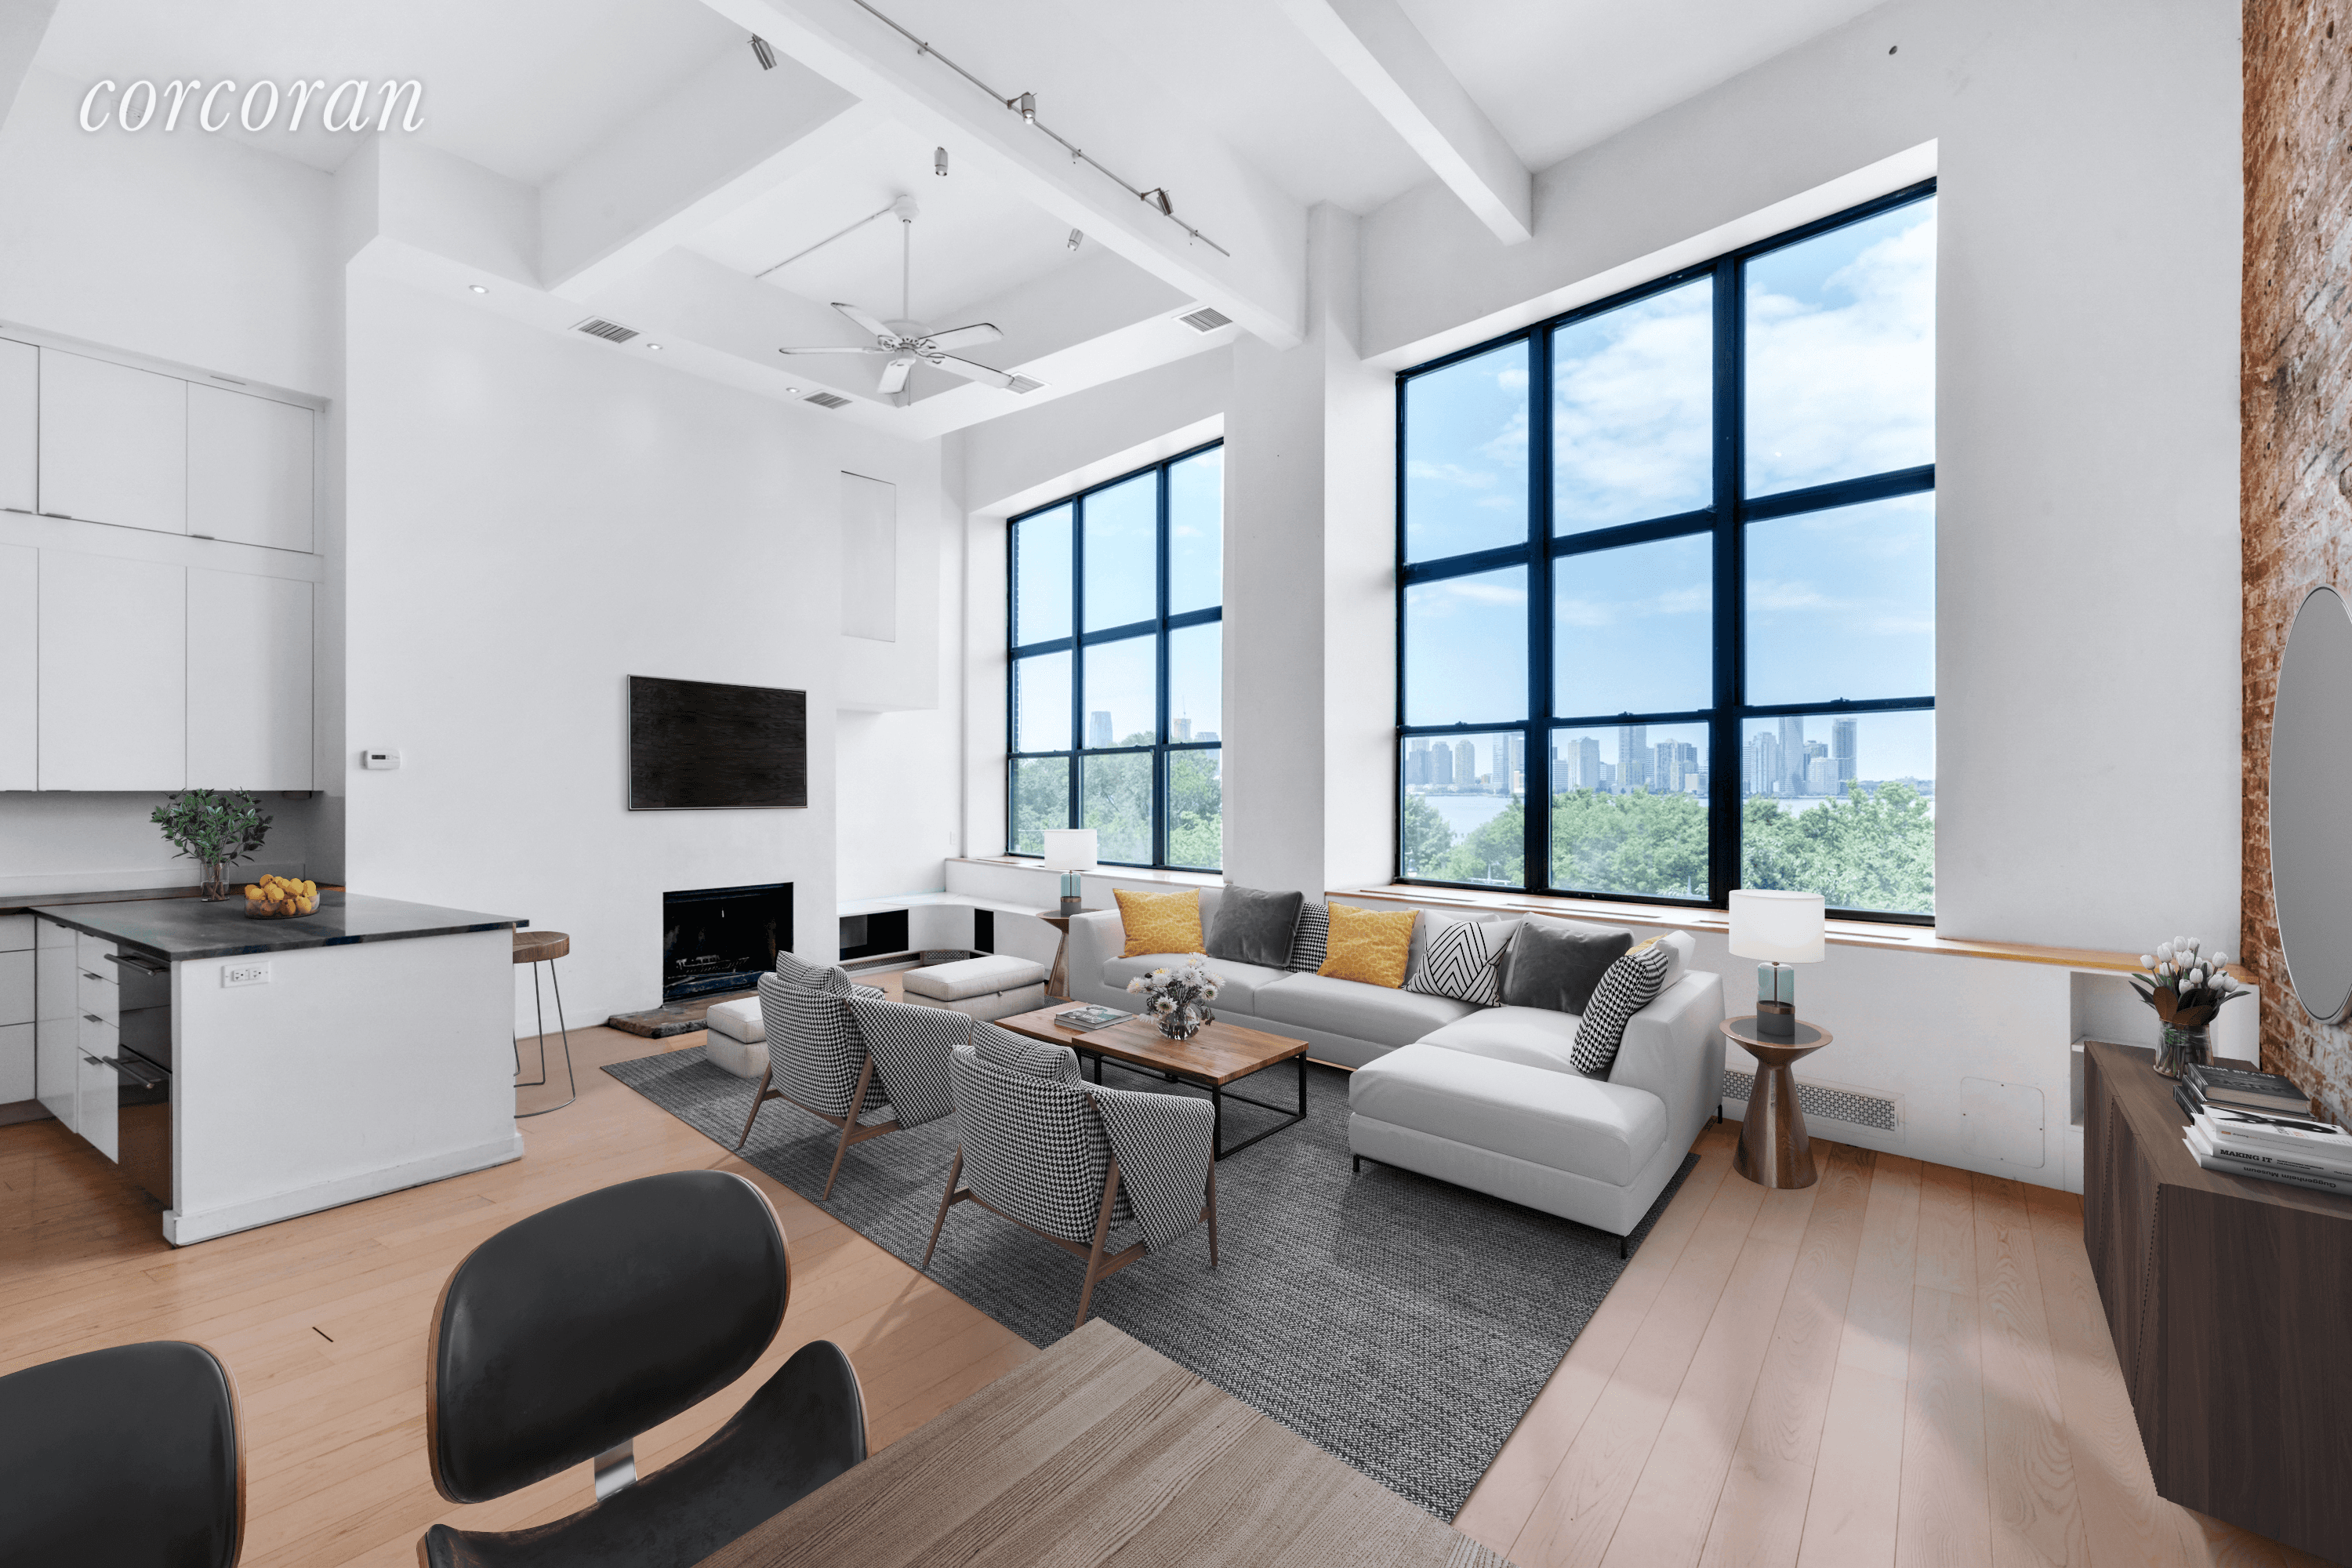 This oversized West Village pre war loft with spectacular Hudson River views features enormous west facing windows, 15 foot ceilings and an abundance of living space and beautiful exposed brick.